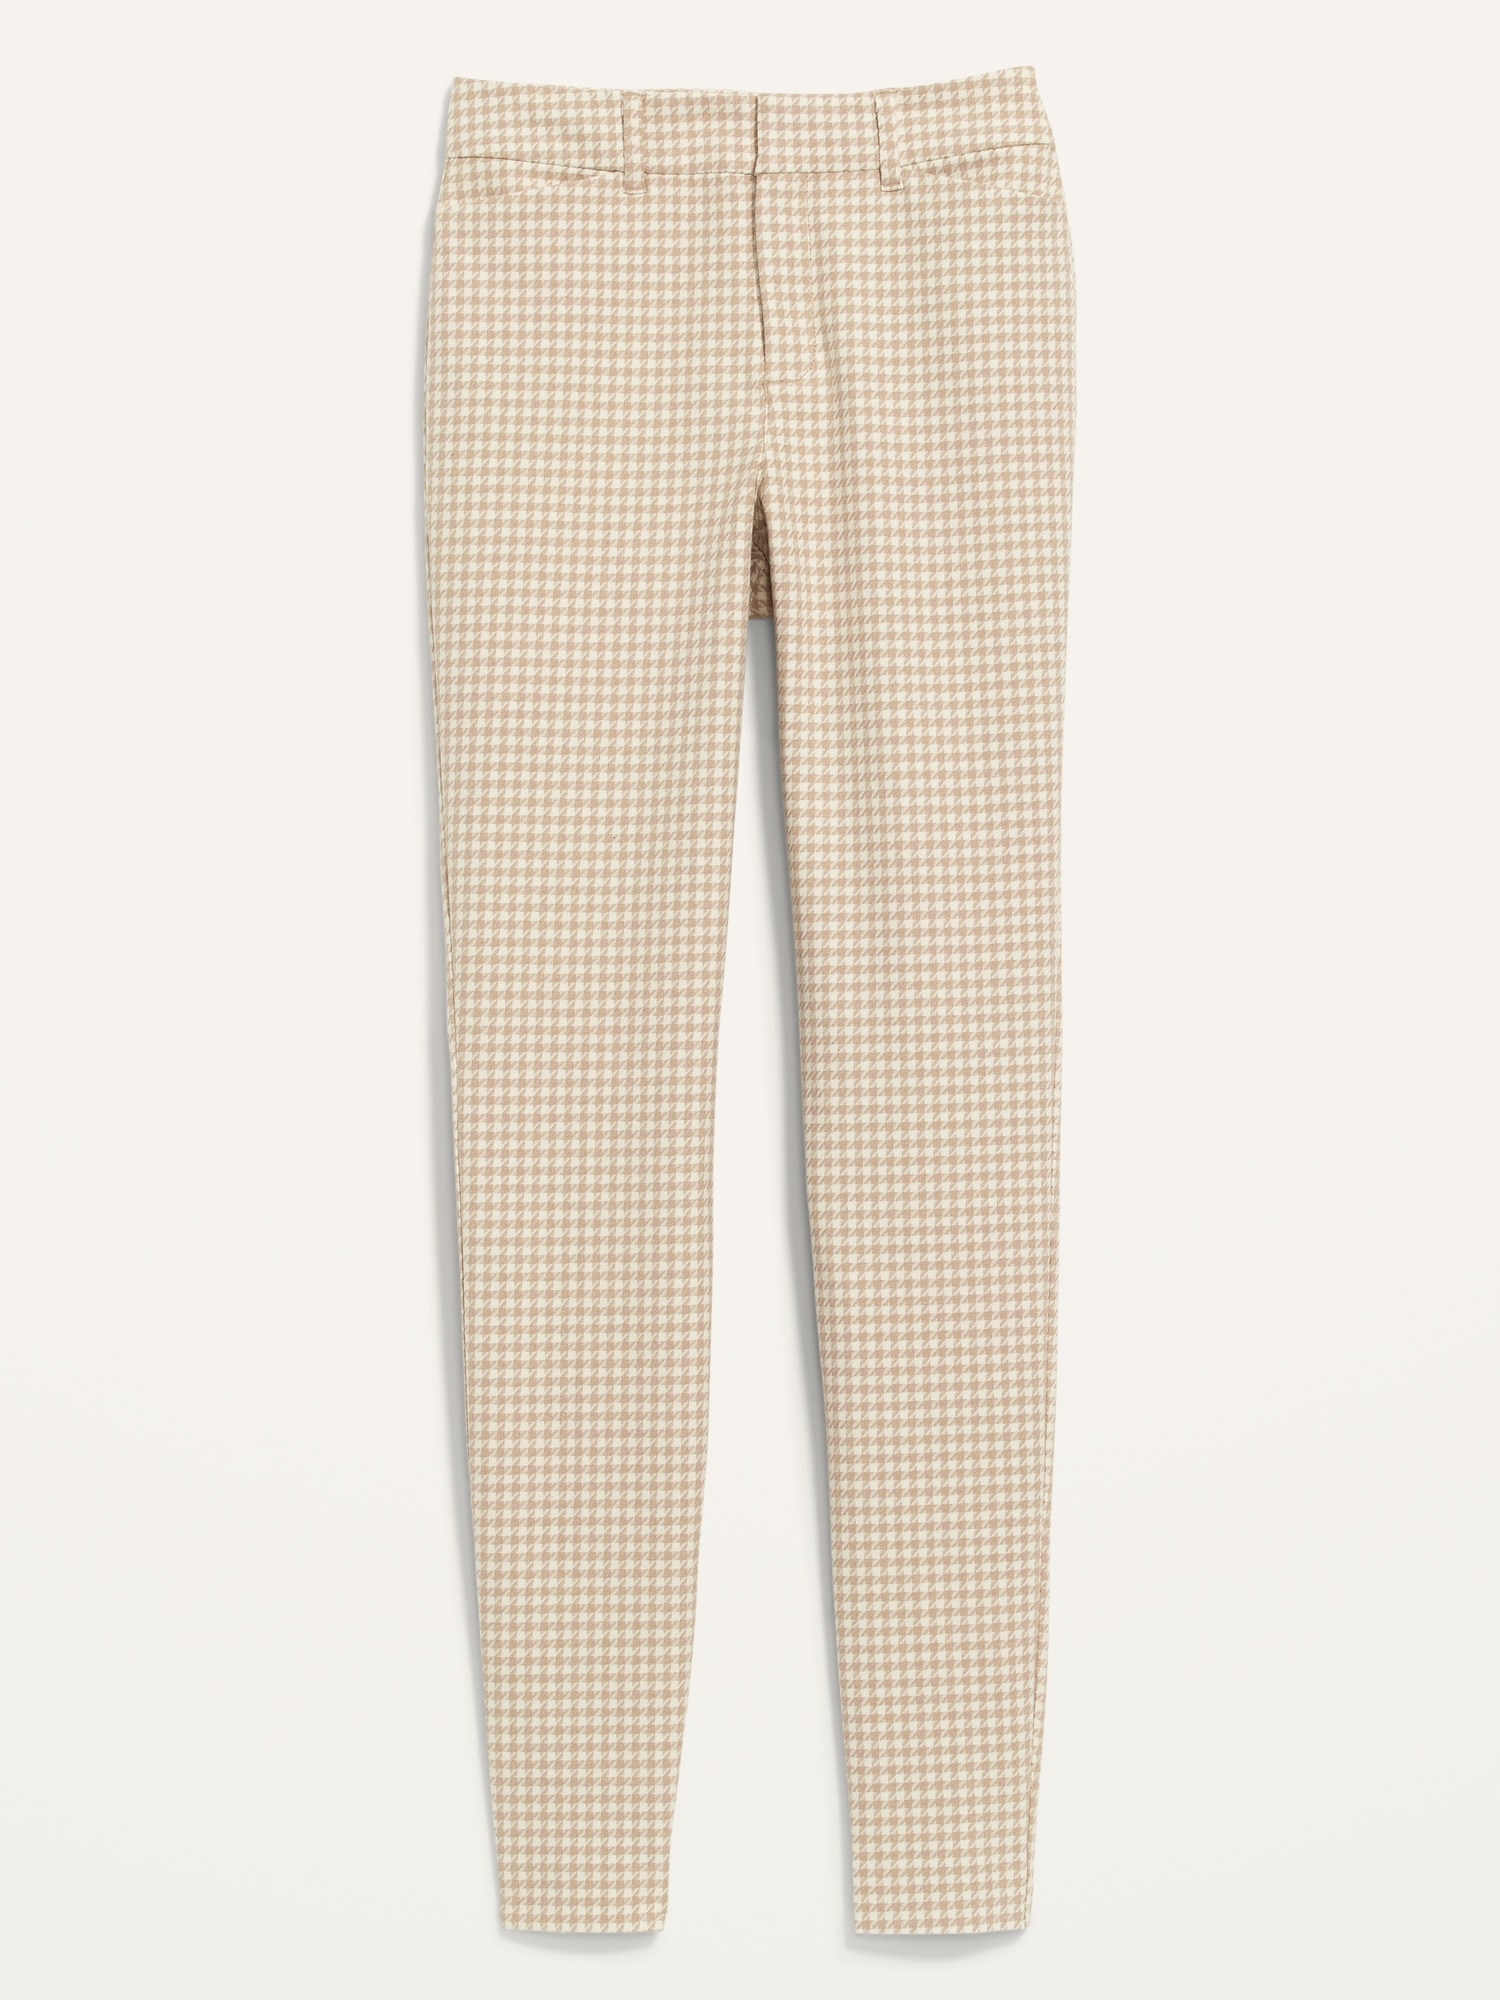 High-Waisted Houndstooth Pixie Skinny Pants for Women | Old Navy